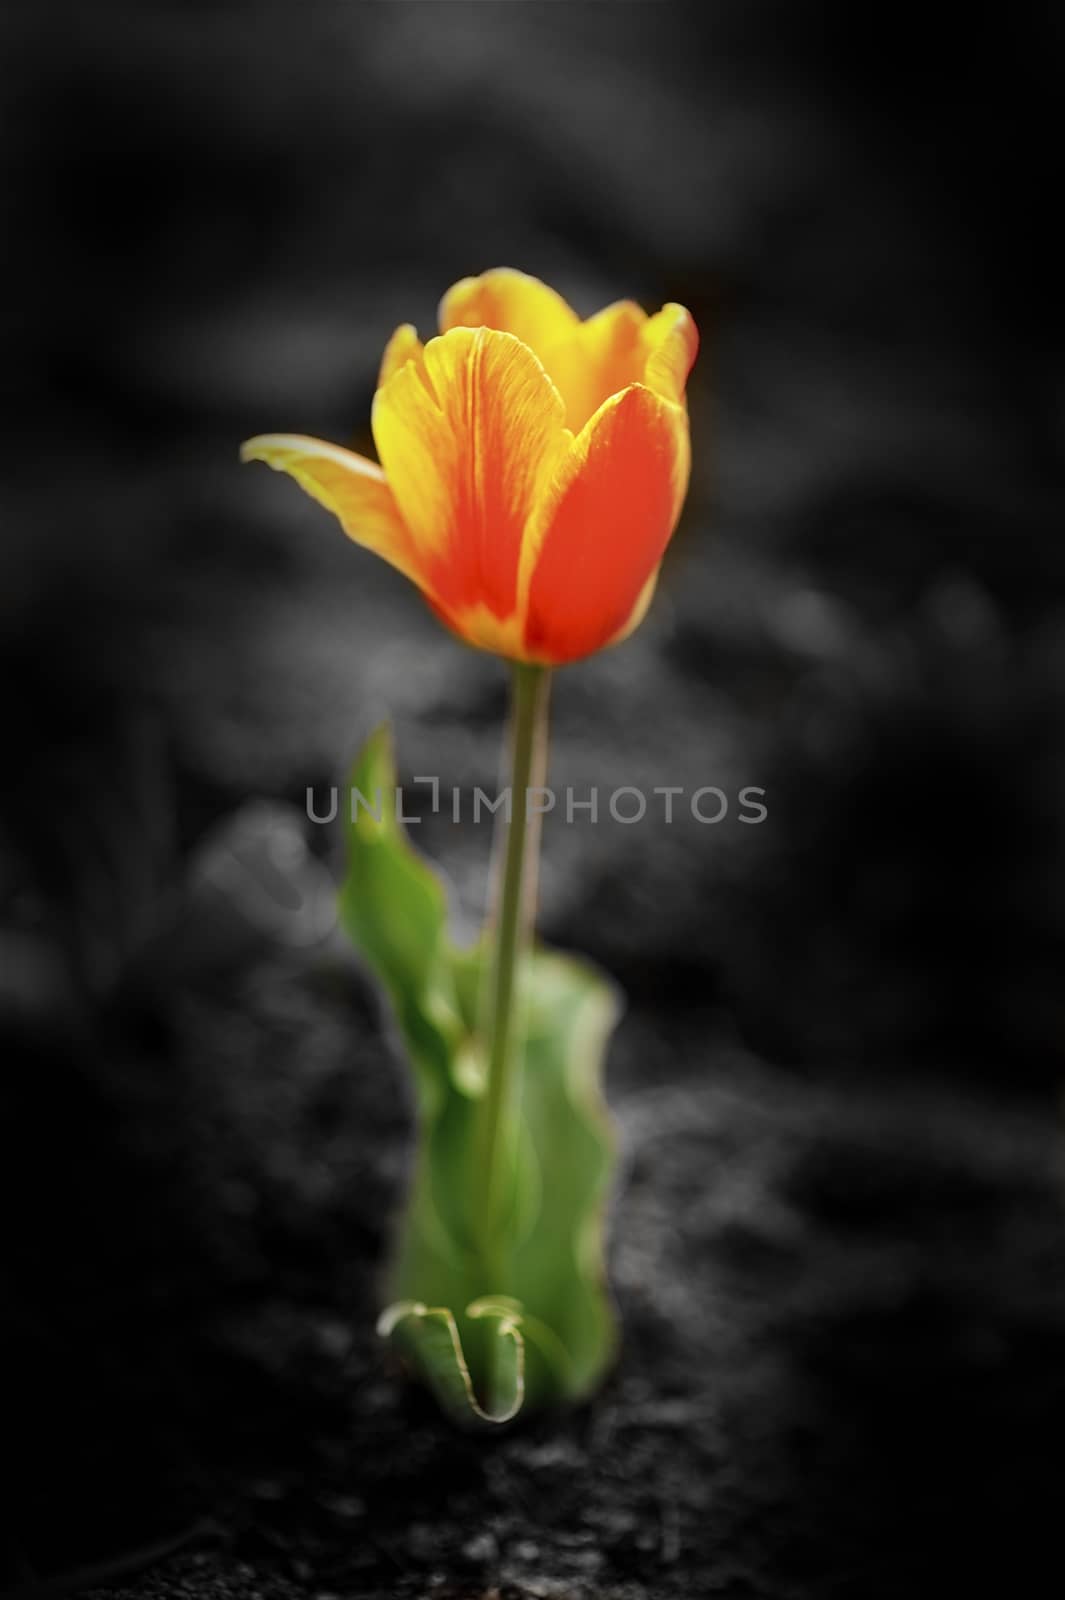 Badlands Blossom. Single Tulip Blossom on Badlands. Grayscale Background and Color Flower in the Middle. Floral and Botanic Photo Collection.